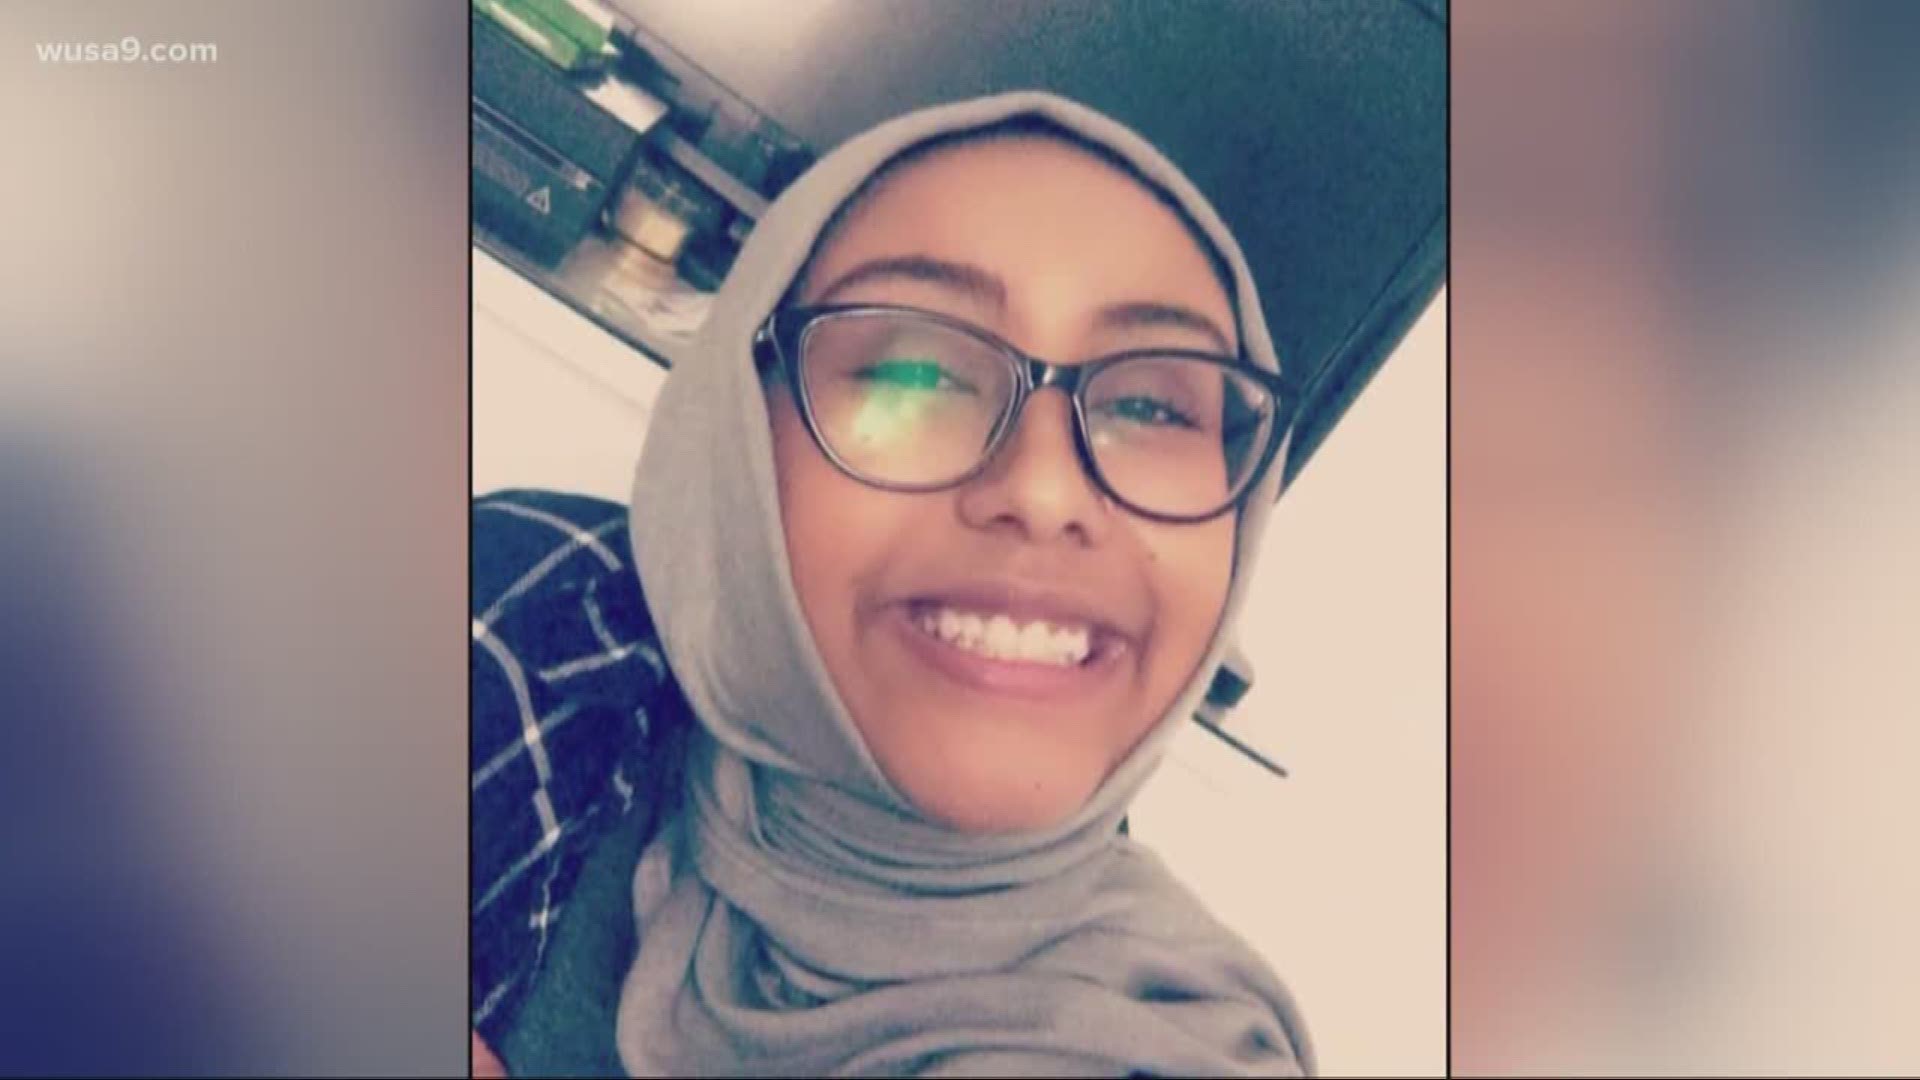 The killer of Nabra Hassanen will spend the rest of his life in prison.